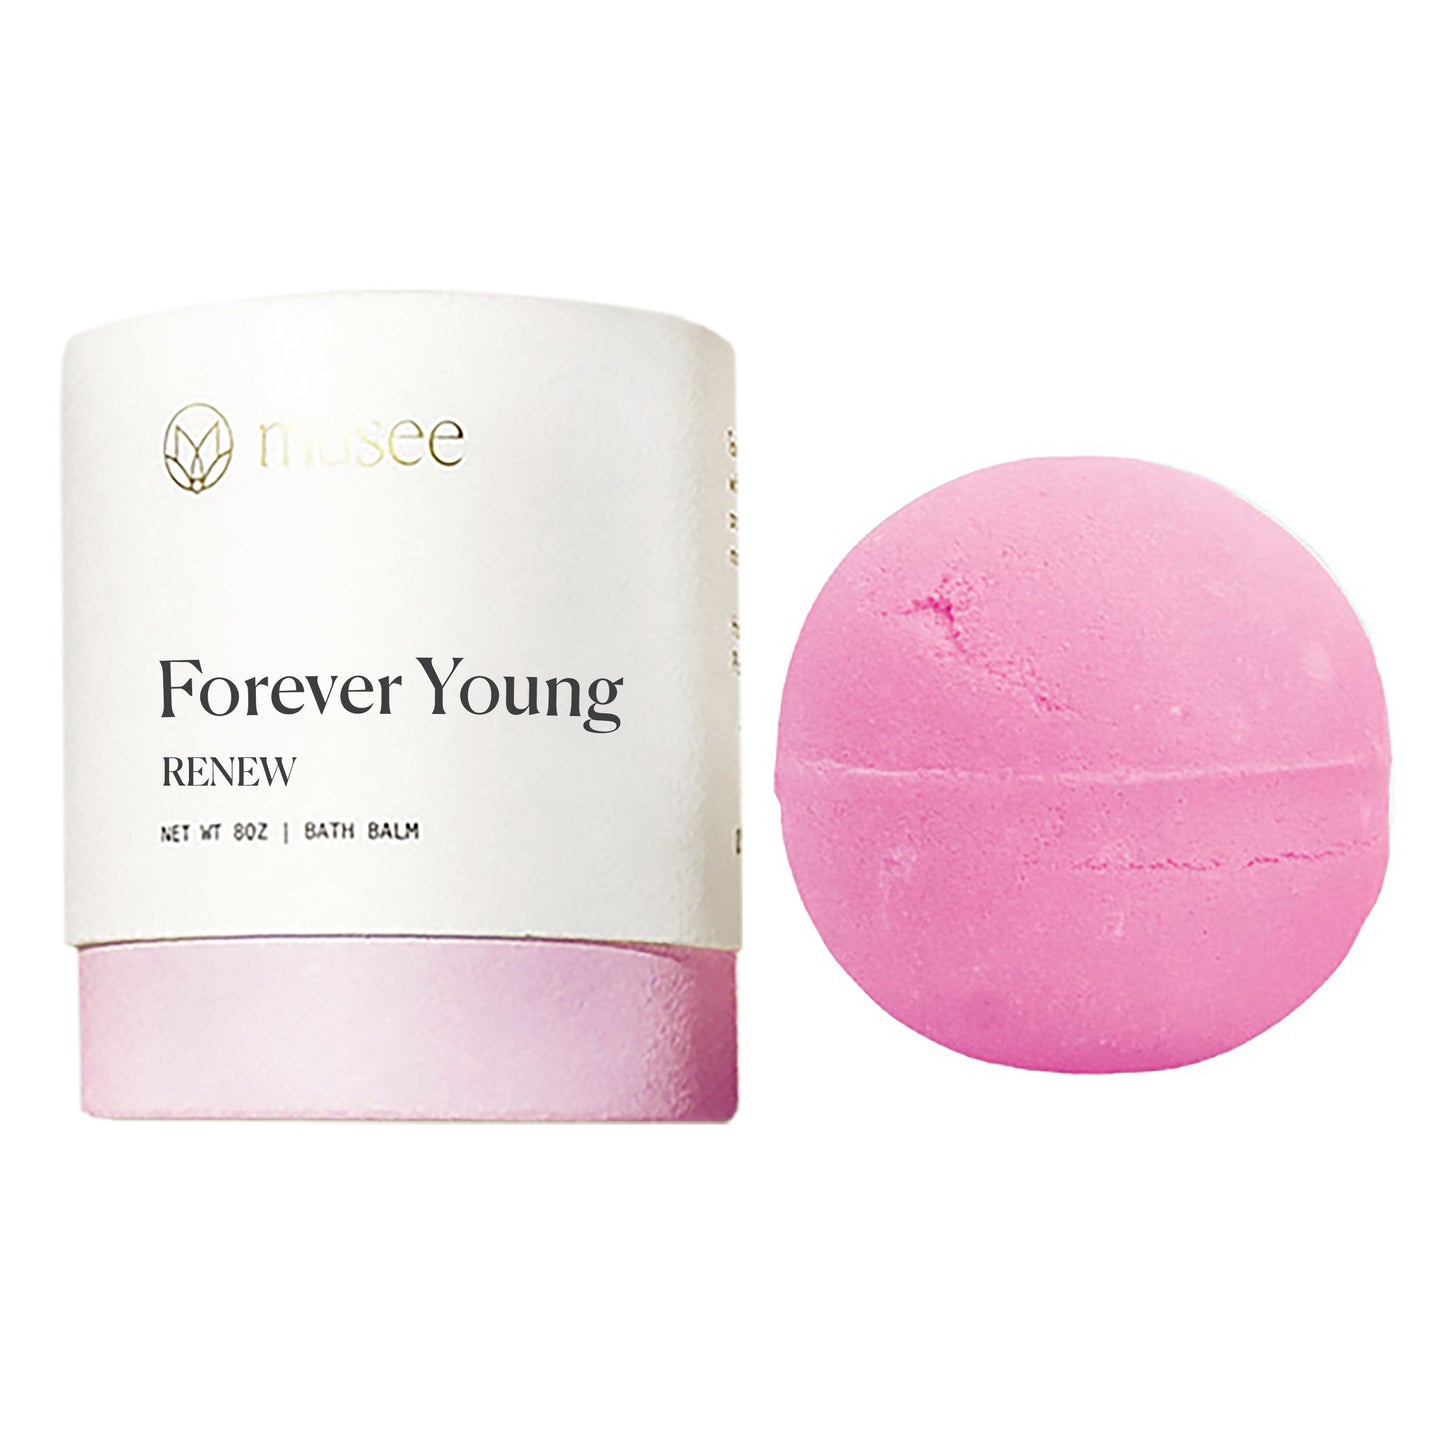 Musee Forever Young Bath Balm. RENEW